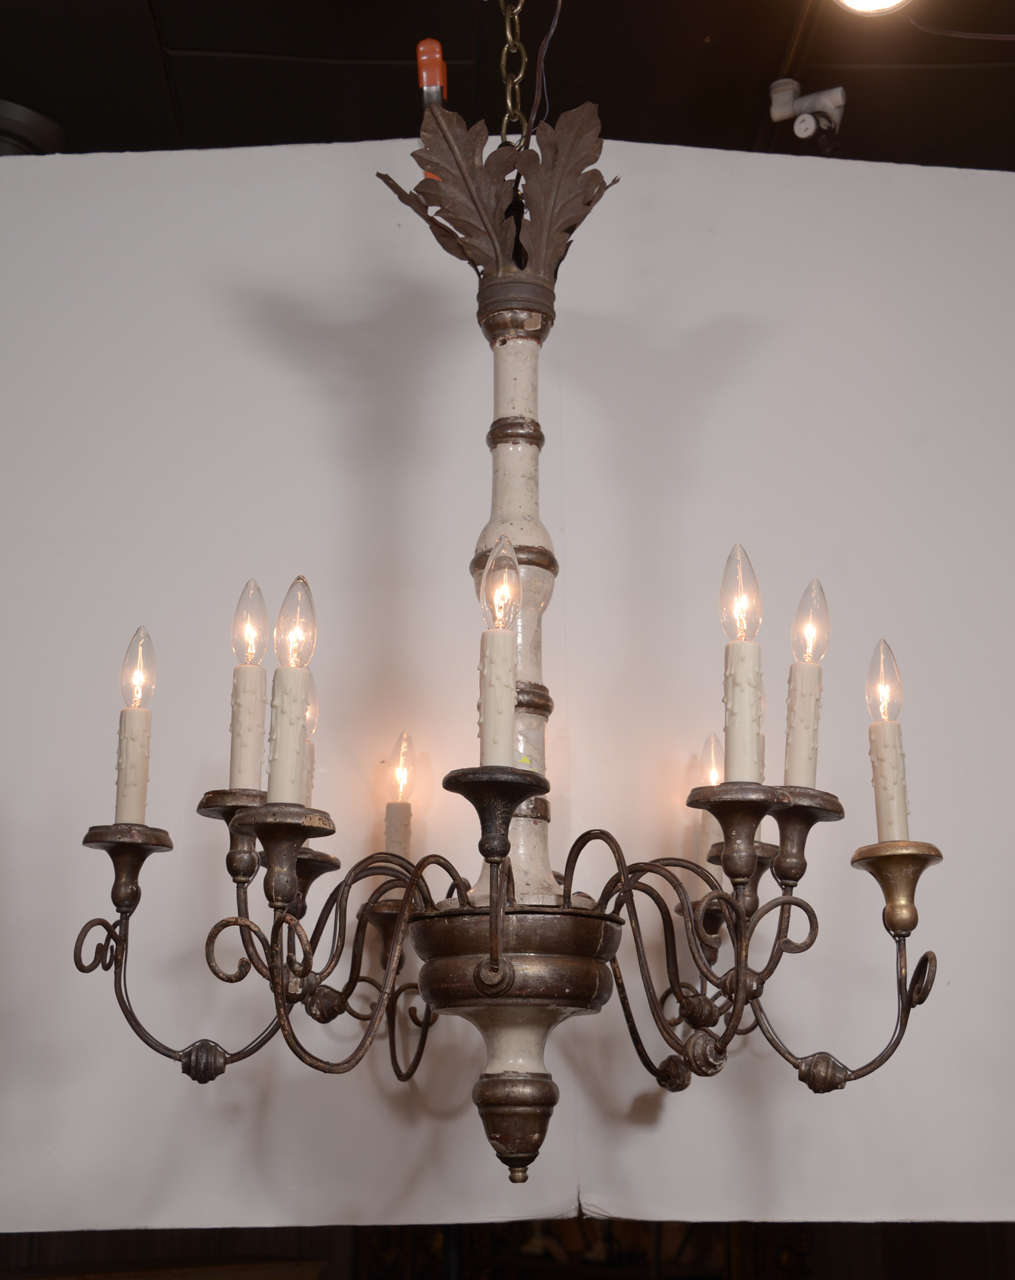 19th century Italian chandeliers consisting of ivory painted turned wooden bodies, silver-leafed iron arms and tole acanthus leaf crown. Newly-wired for use within the USA with twelve lights each. Chandeliers include extra chain, canopies and